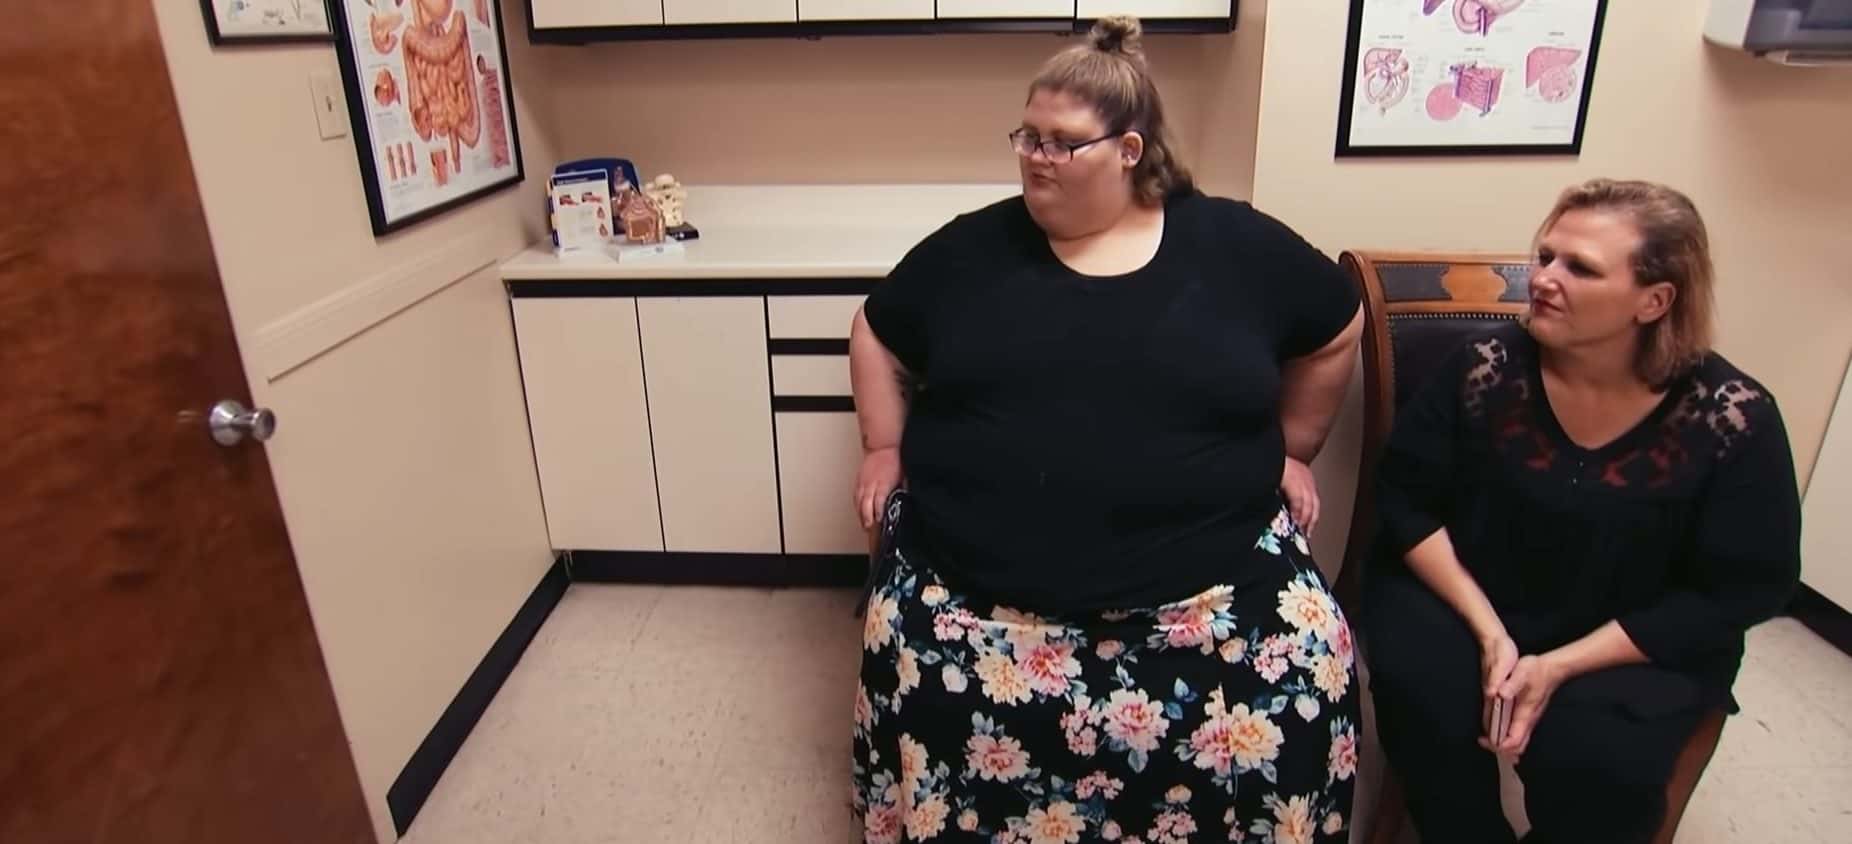 What Happened To Seana On 600 Lb Life?